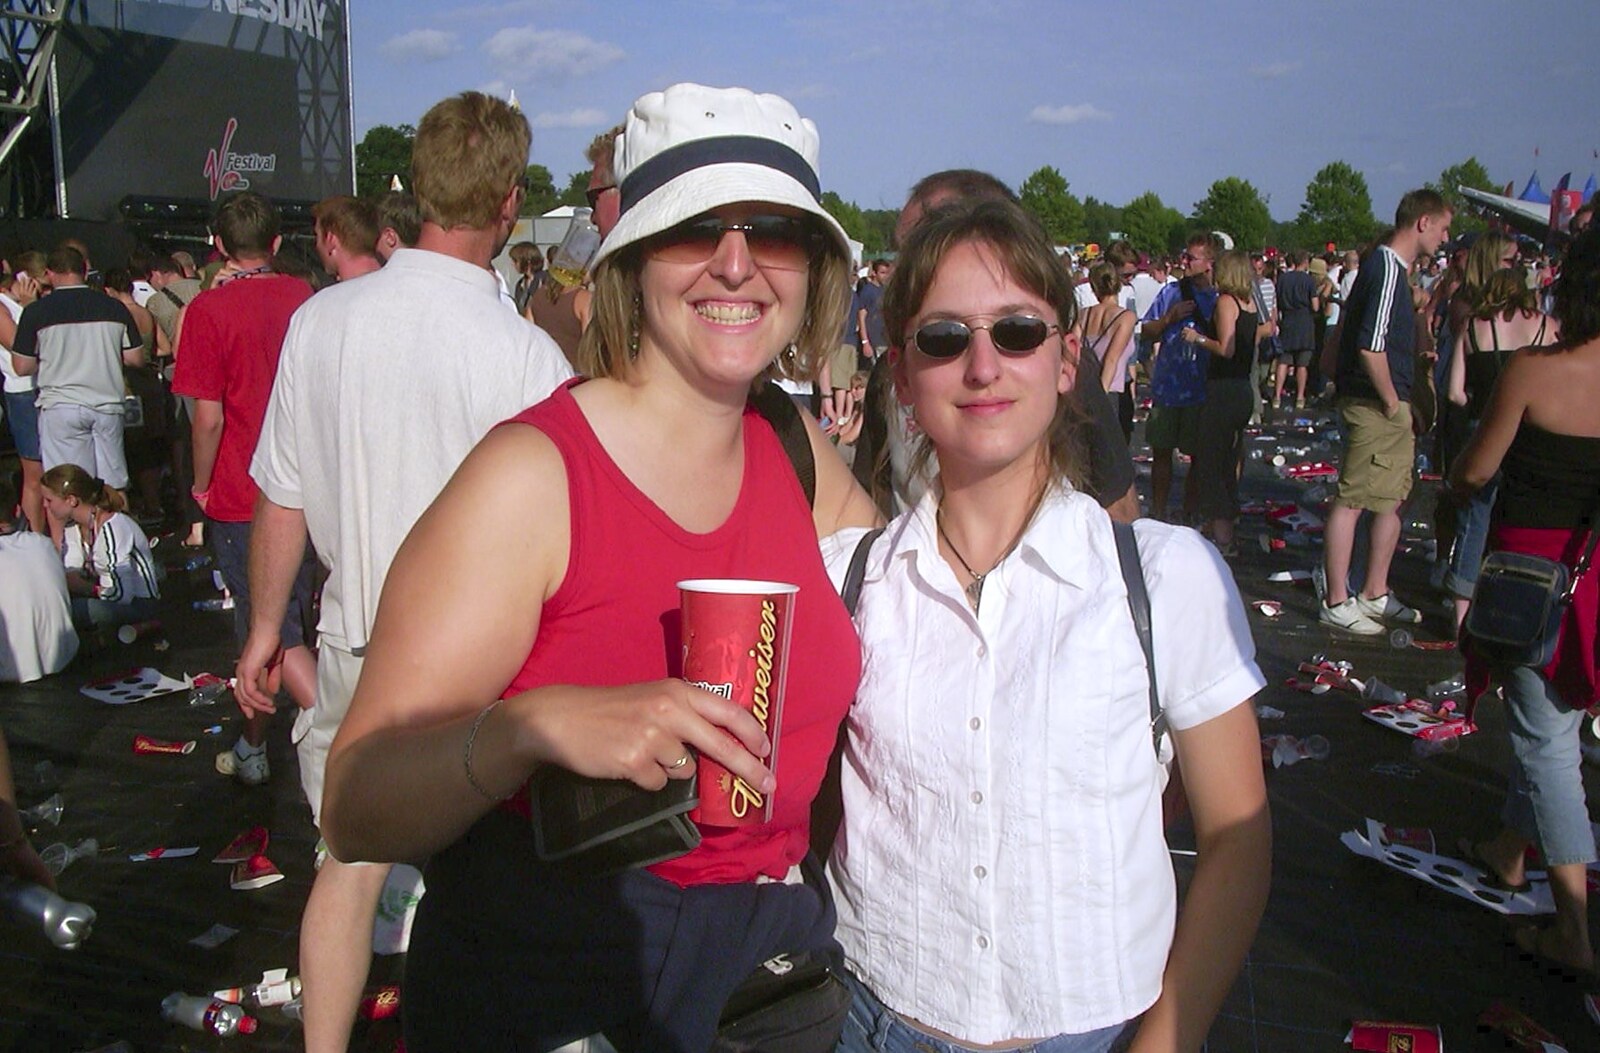 Sarah and Suey, after the Athlete gig from V Festival 2003, Hyland's Park, Chelmsford, Essex - 16th August 2003